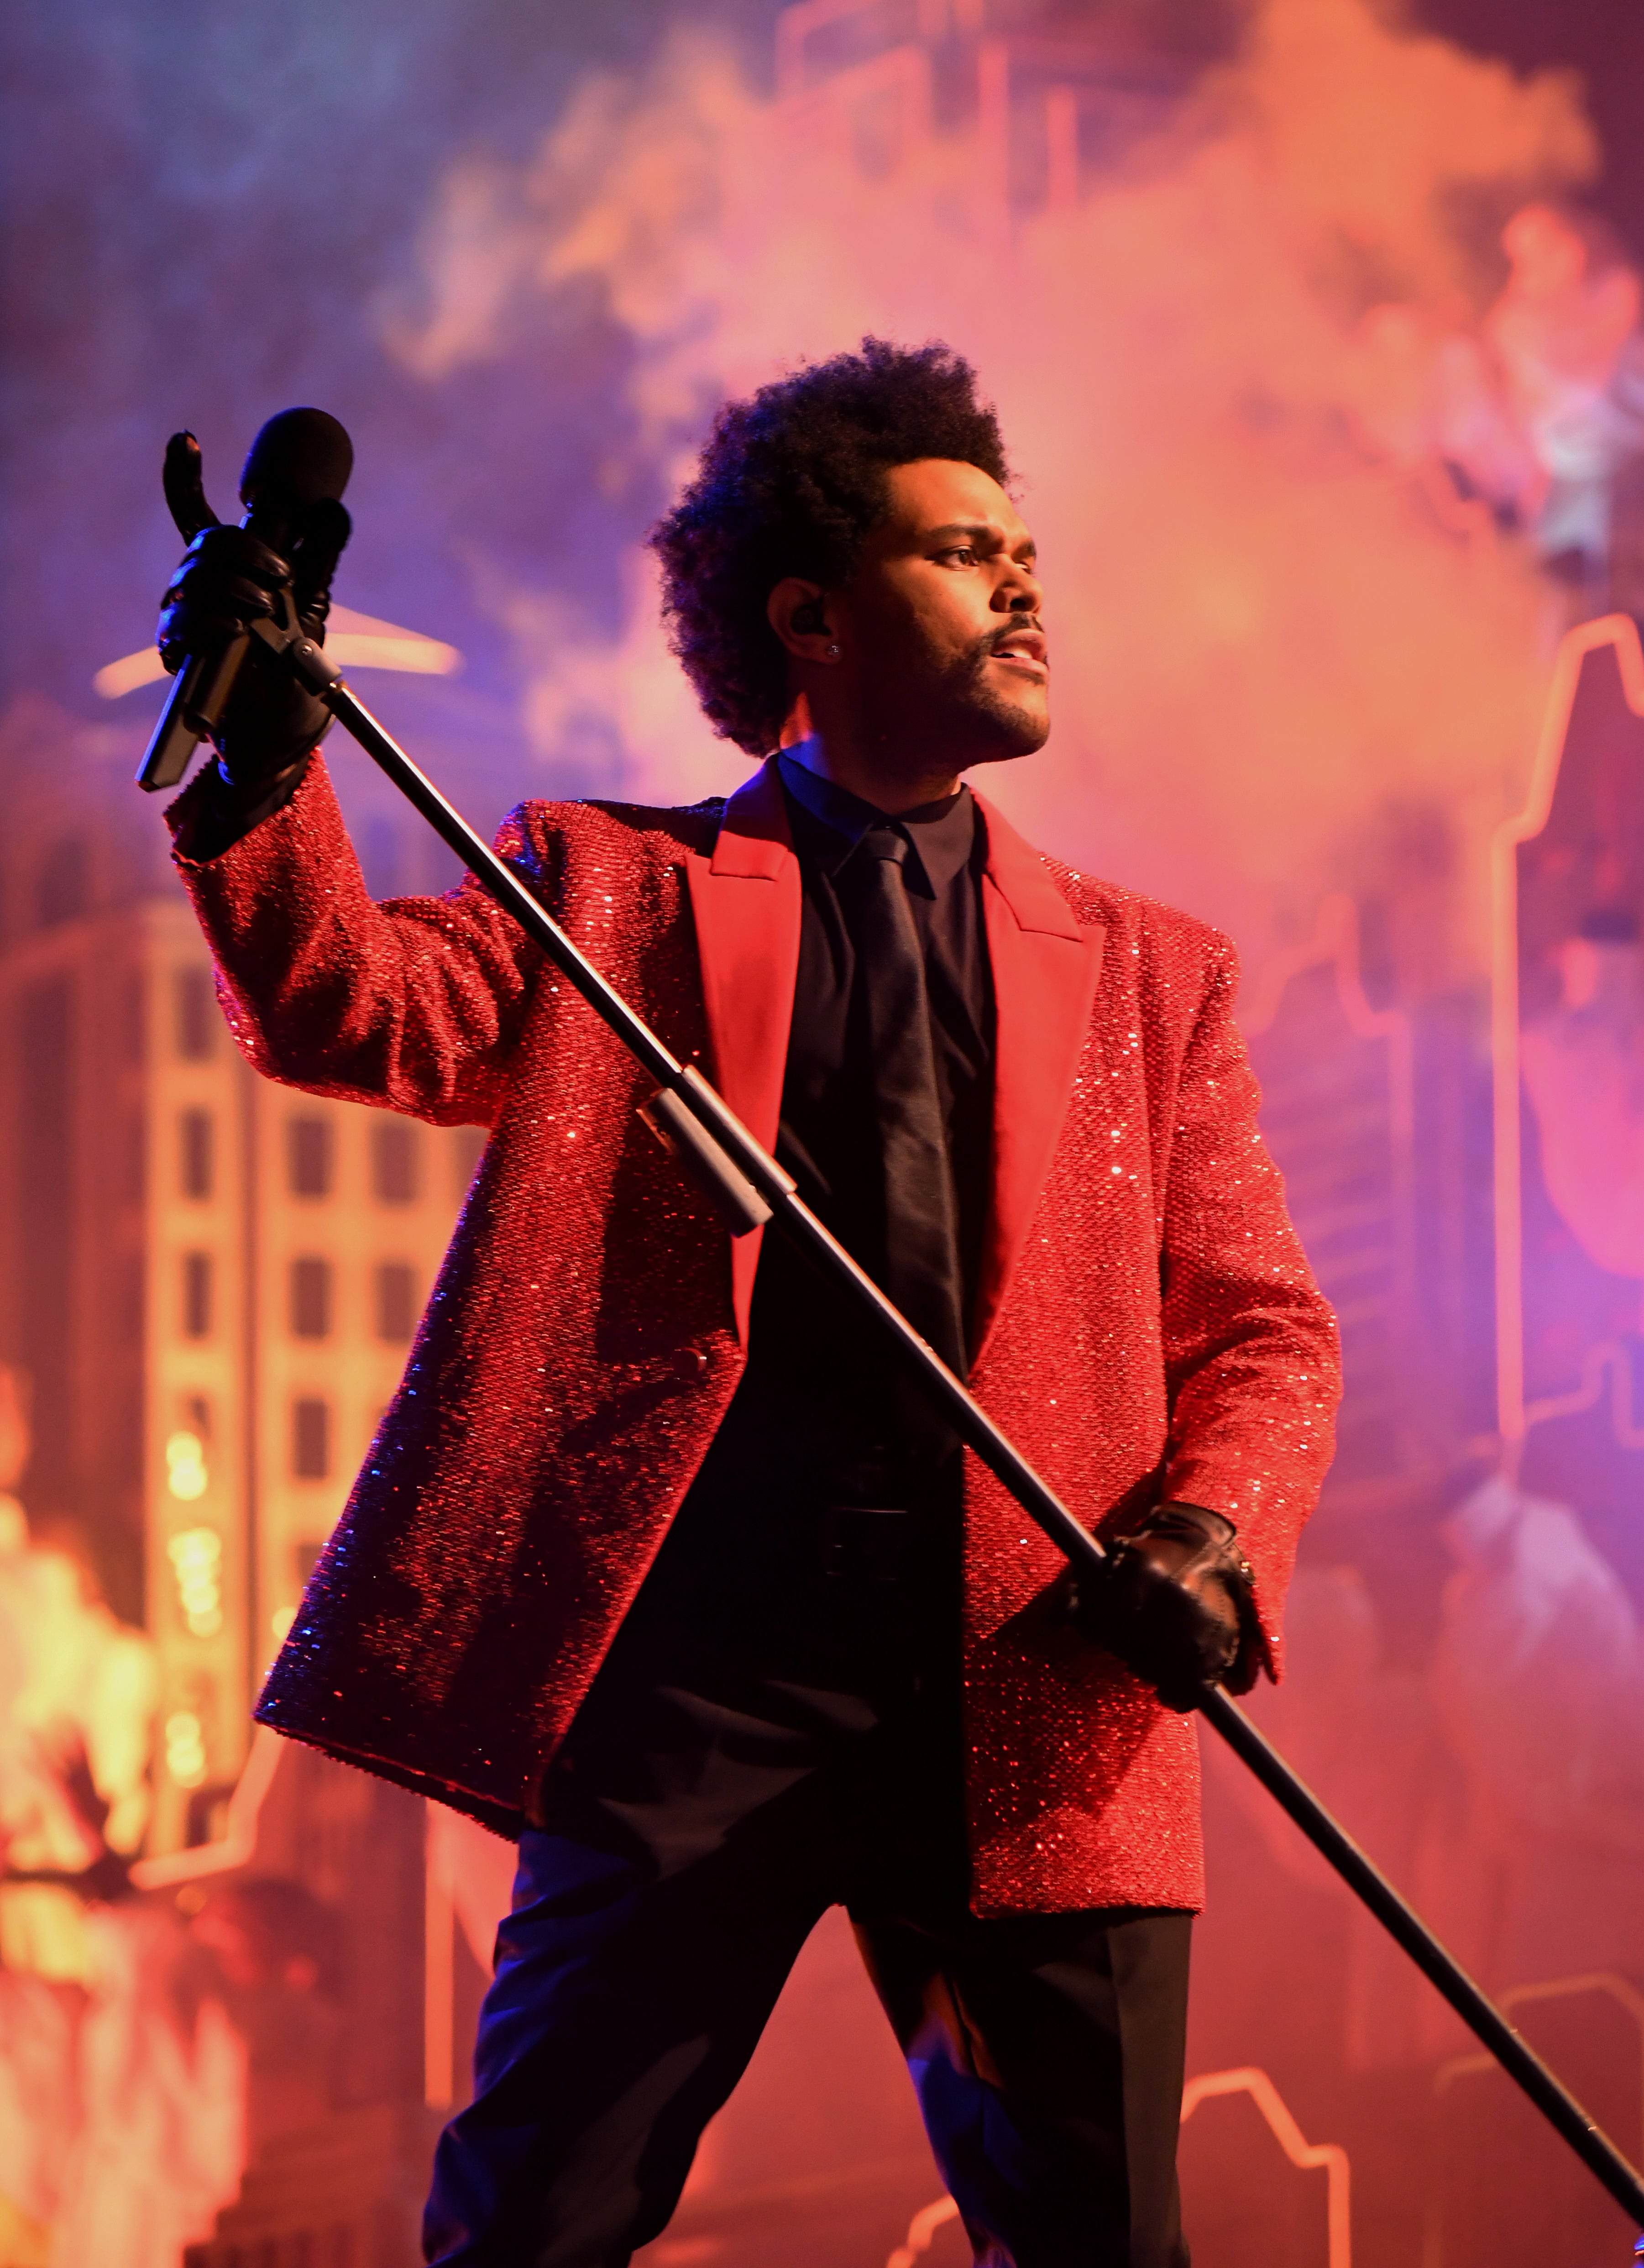 Who performed at the 2021 Super Bowl halftime show? The Weeknd, explained -  Vox